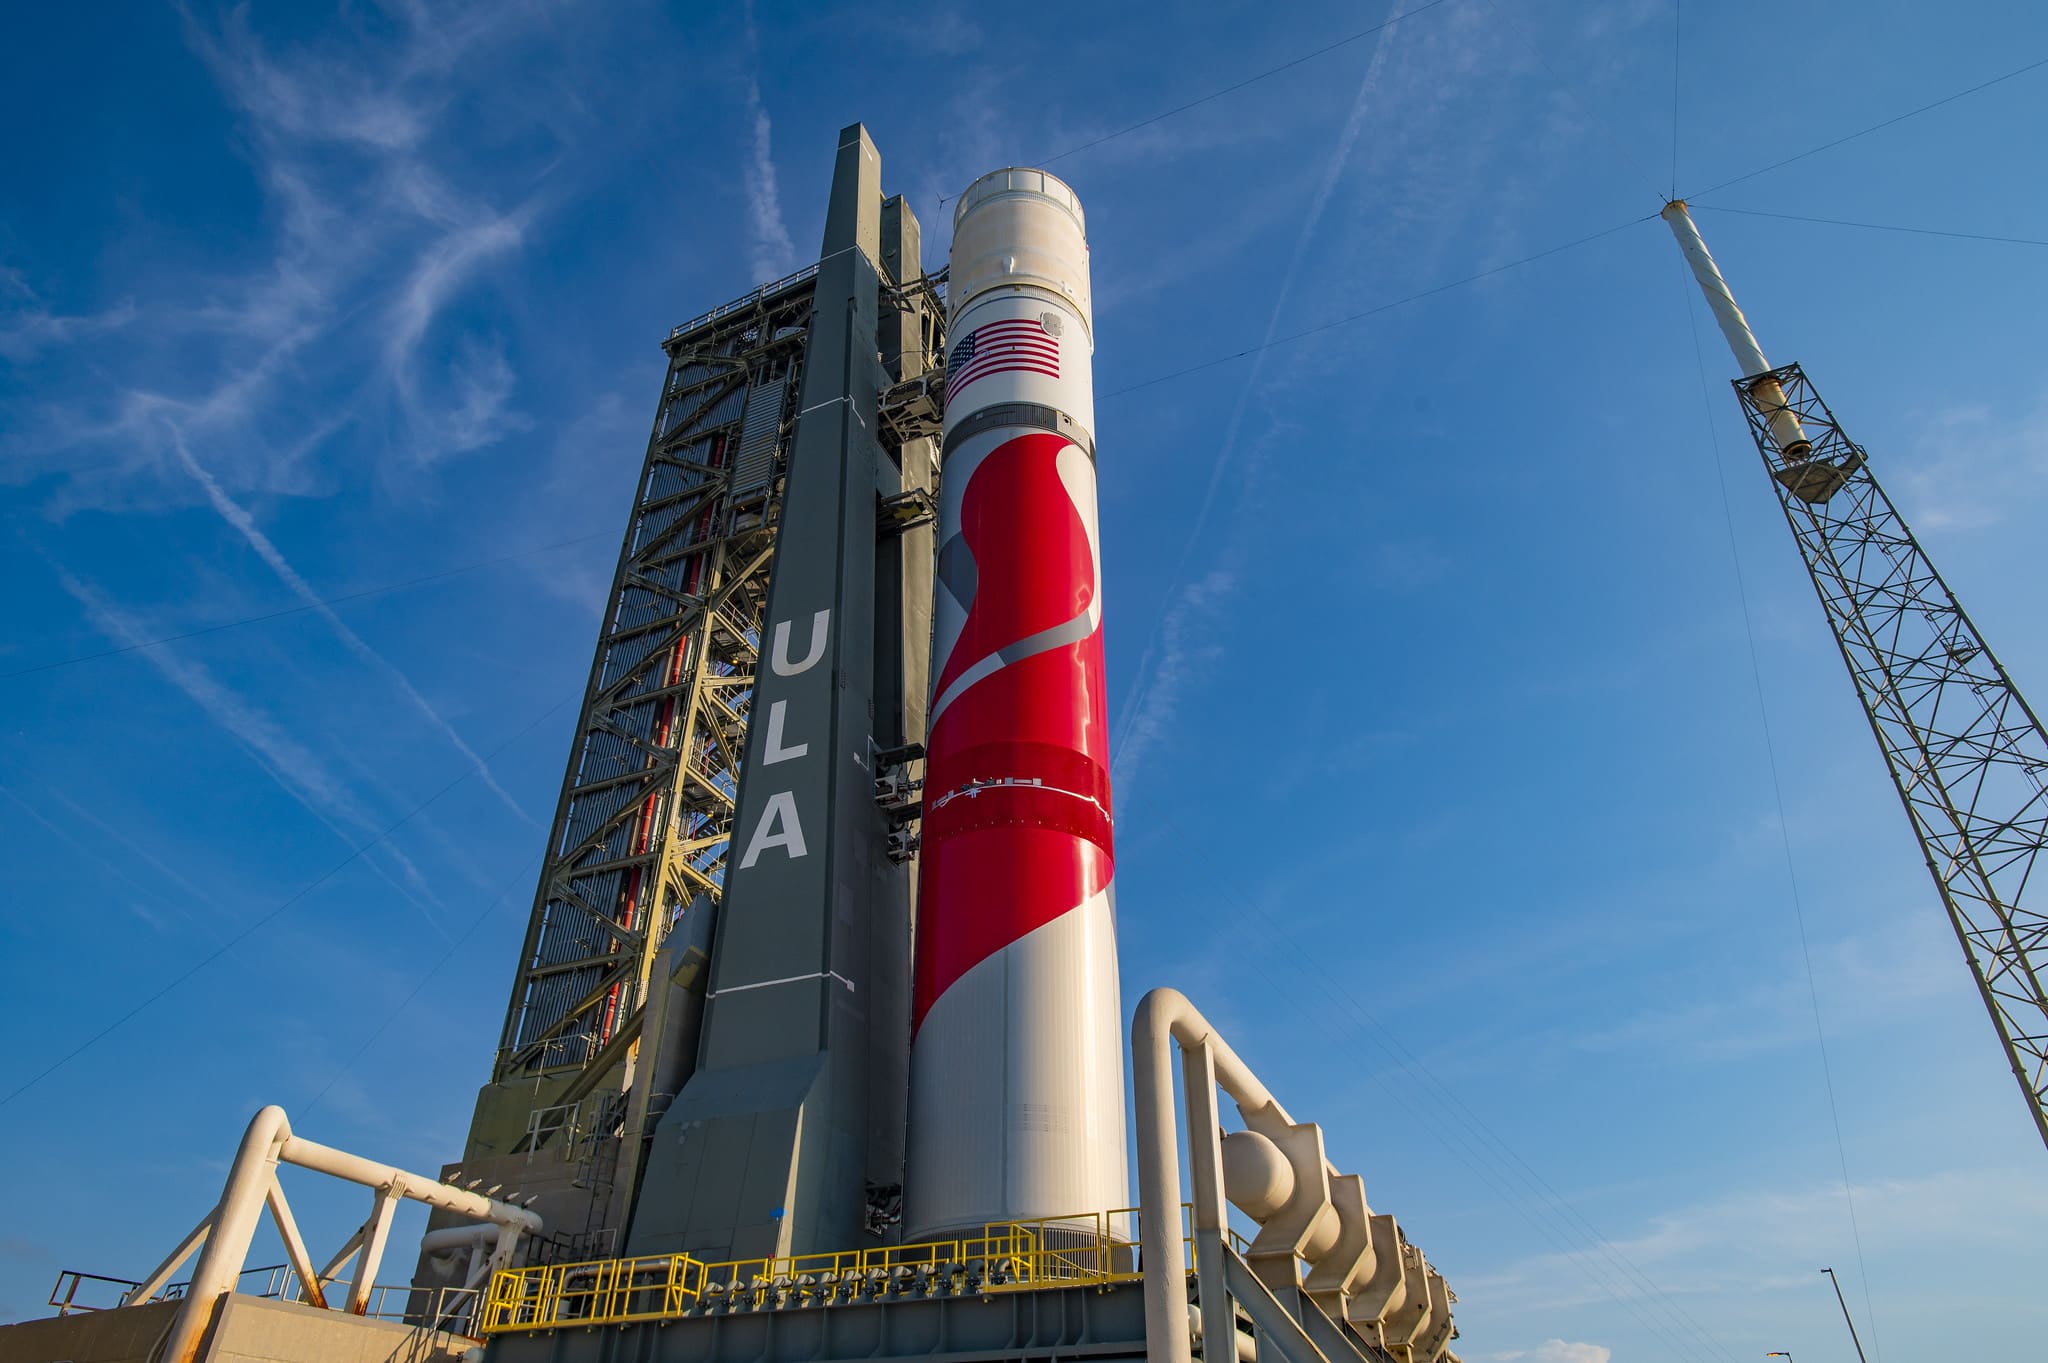 The inaugural Vulcan rocket launch is scheduled for Christmas Eve